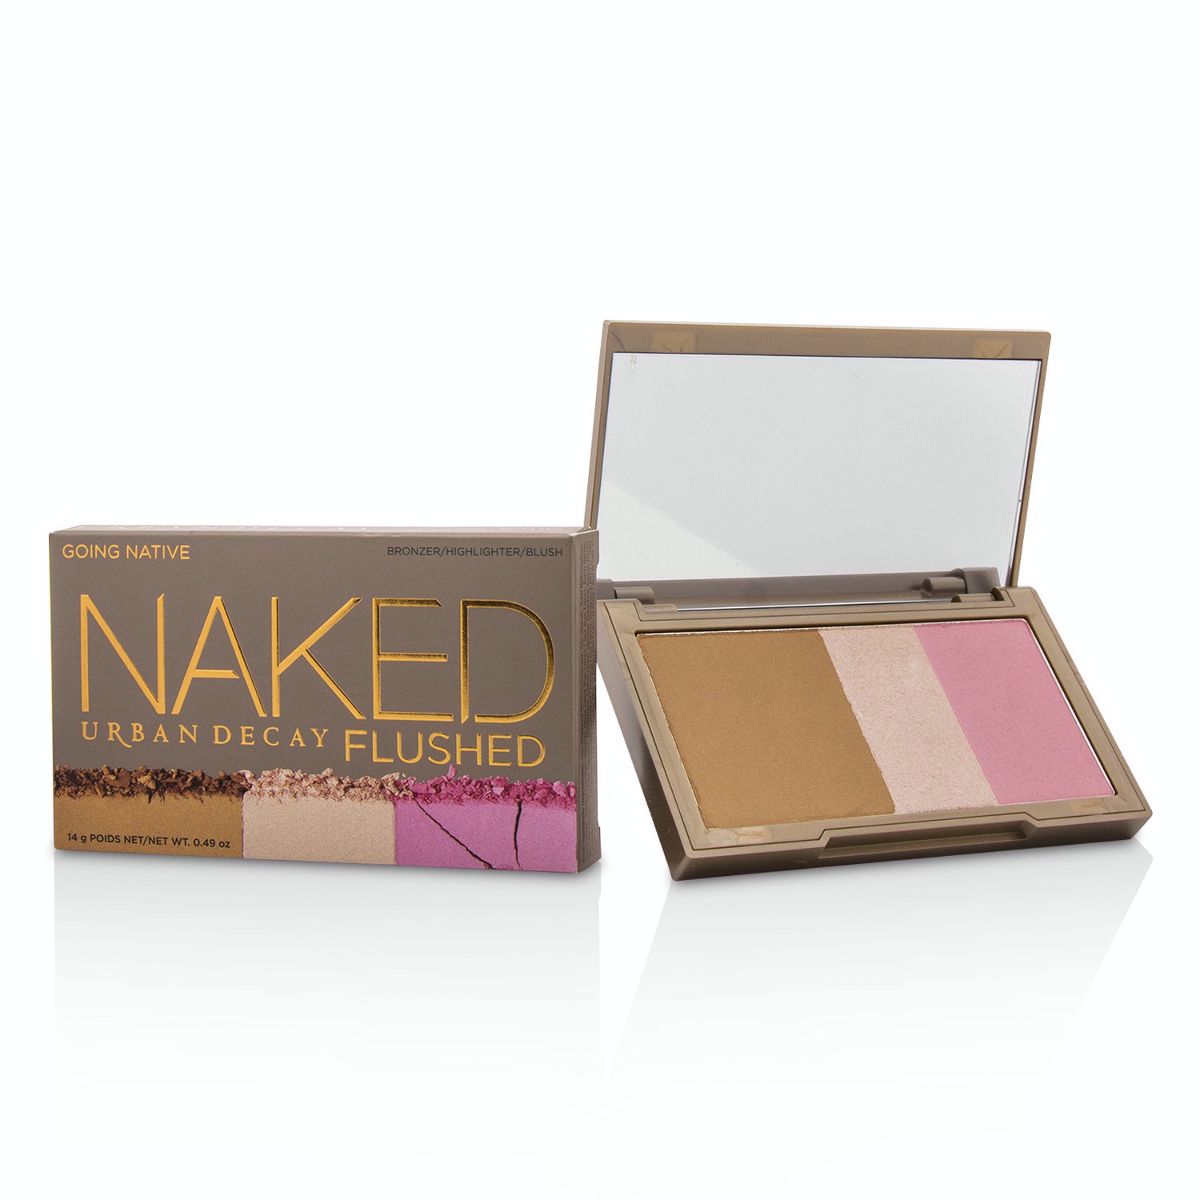 Naked Flushed - Going Native (1x Blush 1x Bronzer 1x Highlighter) Urban Decay Image